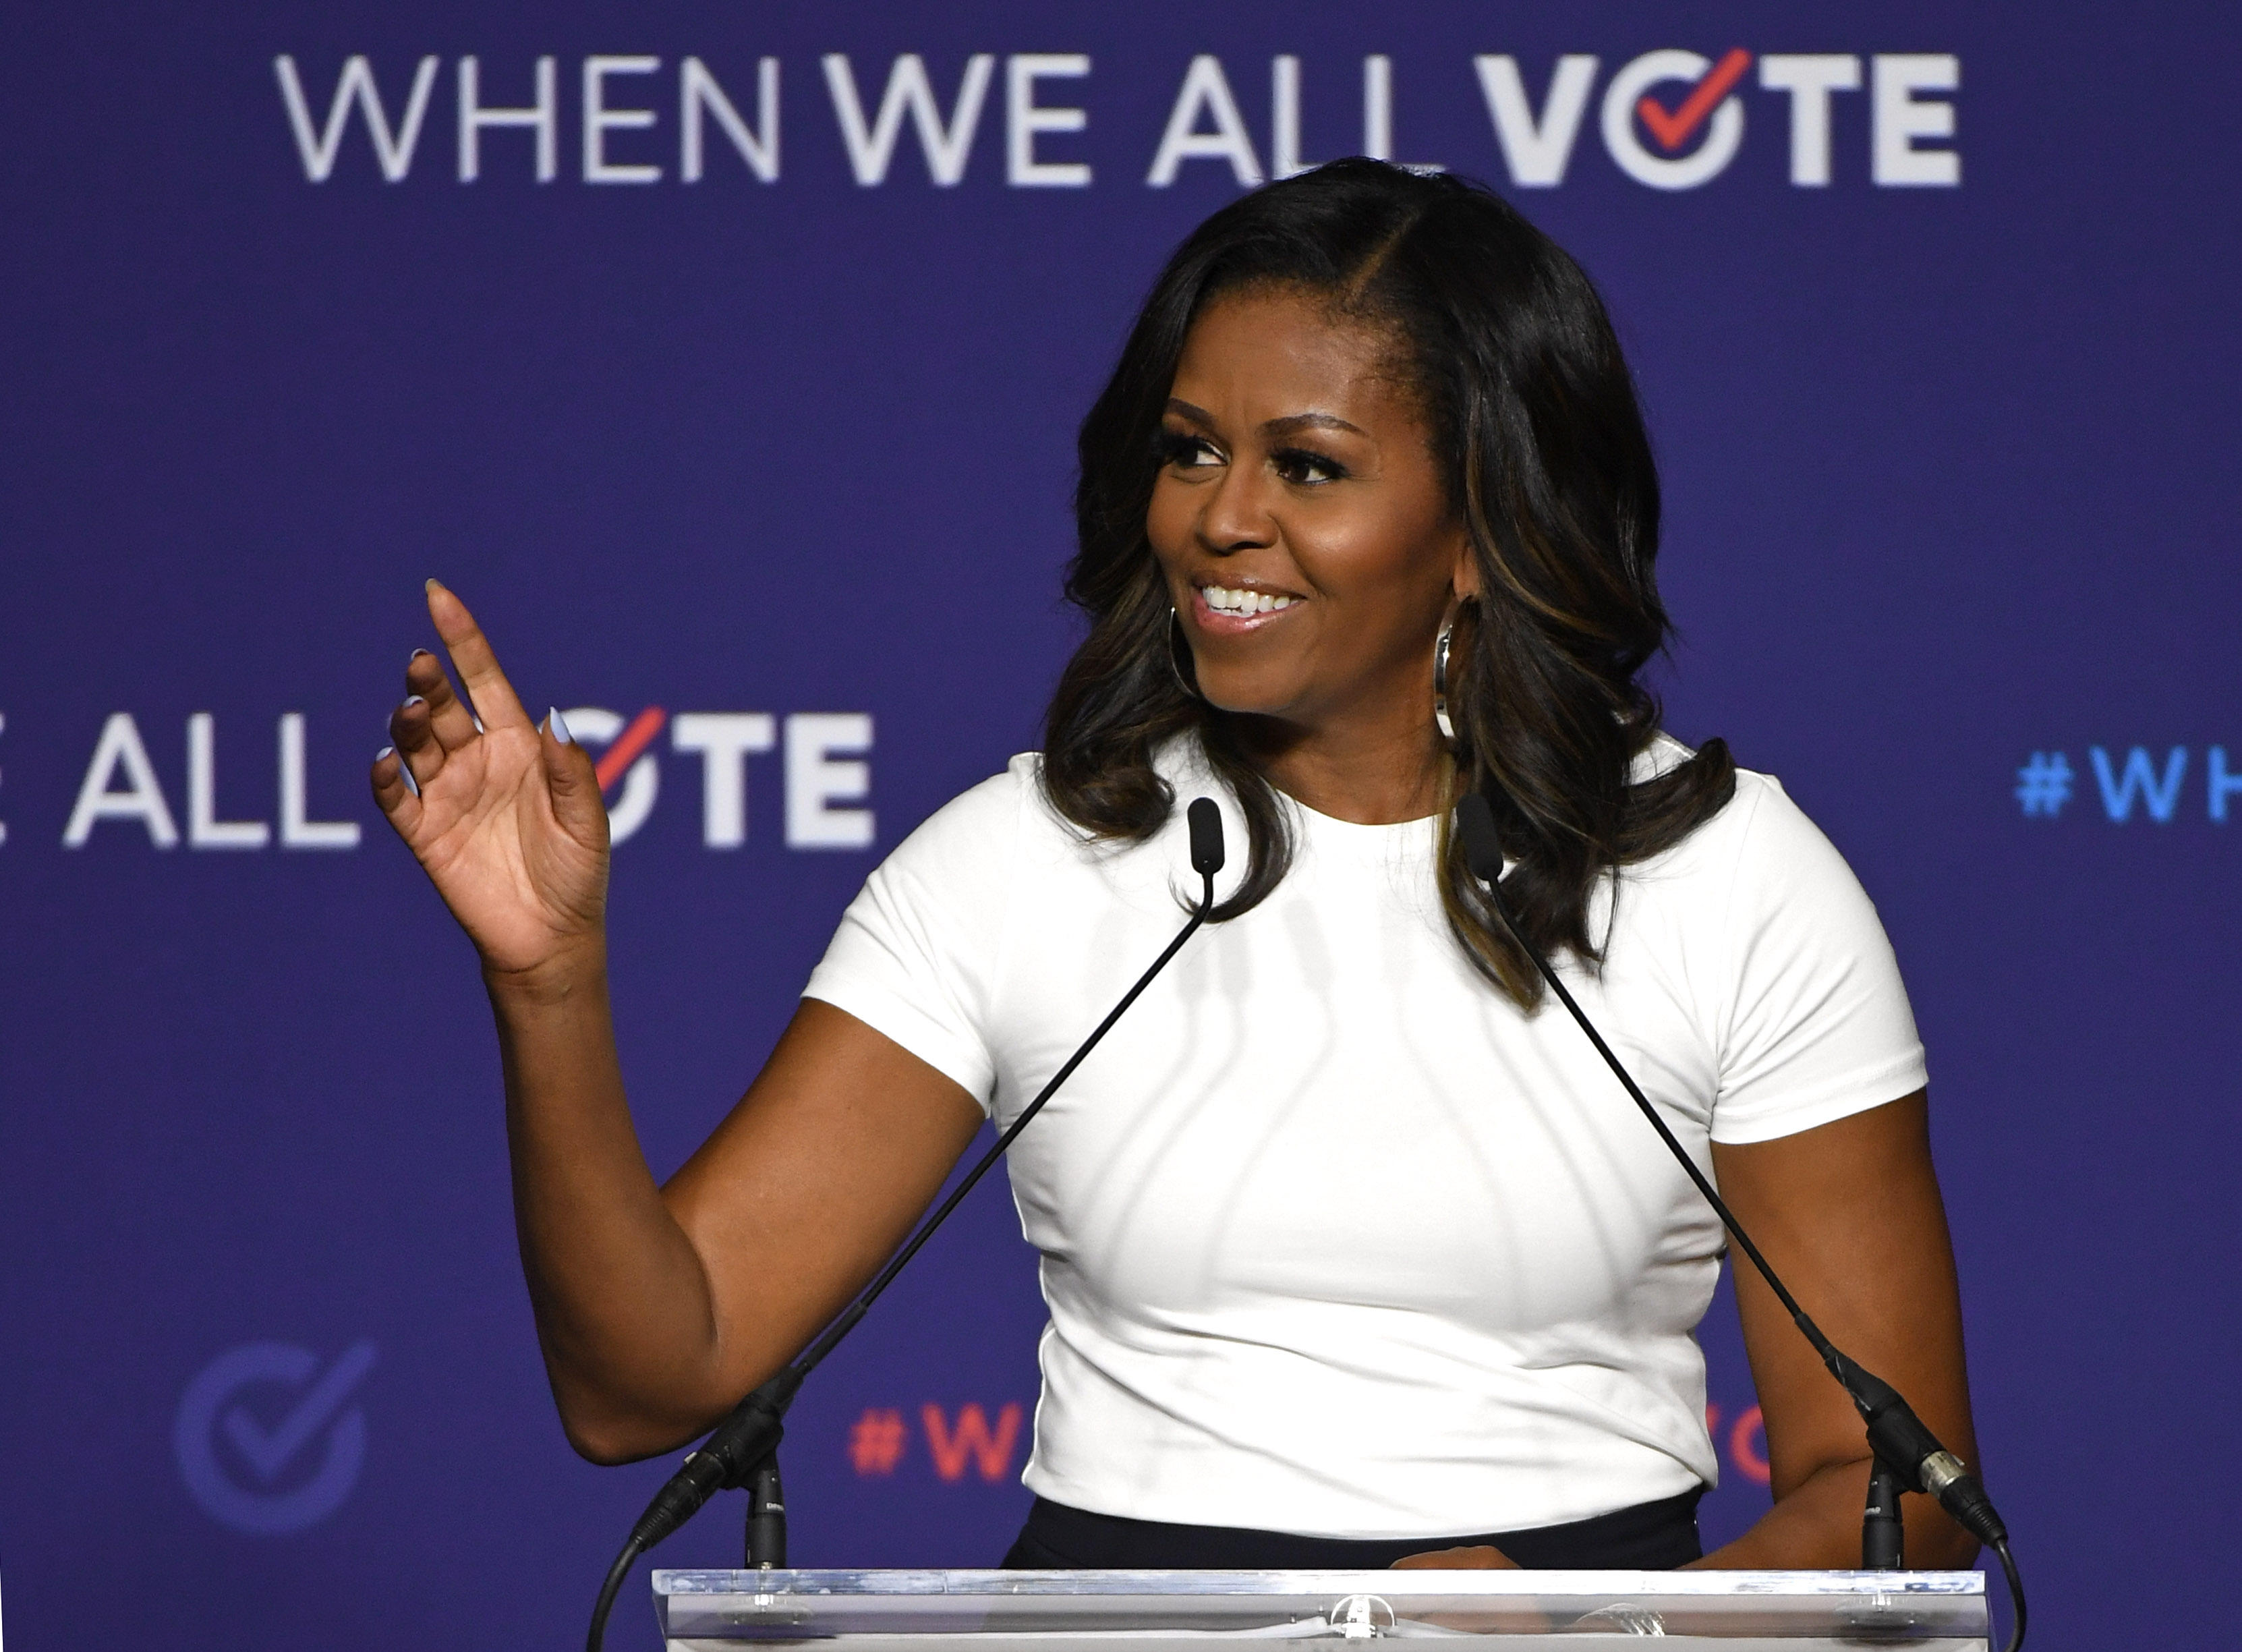 Former first lady Michelle Obama rally in Las Vegas, Nevada, today